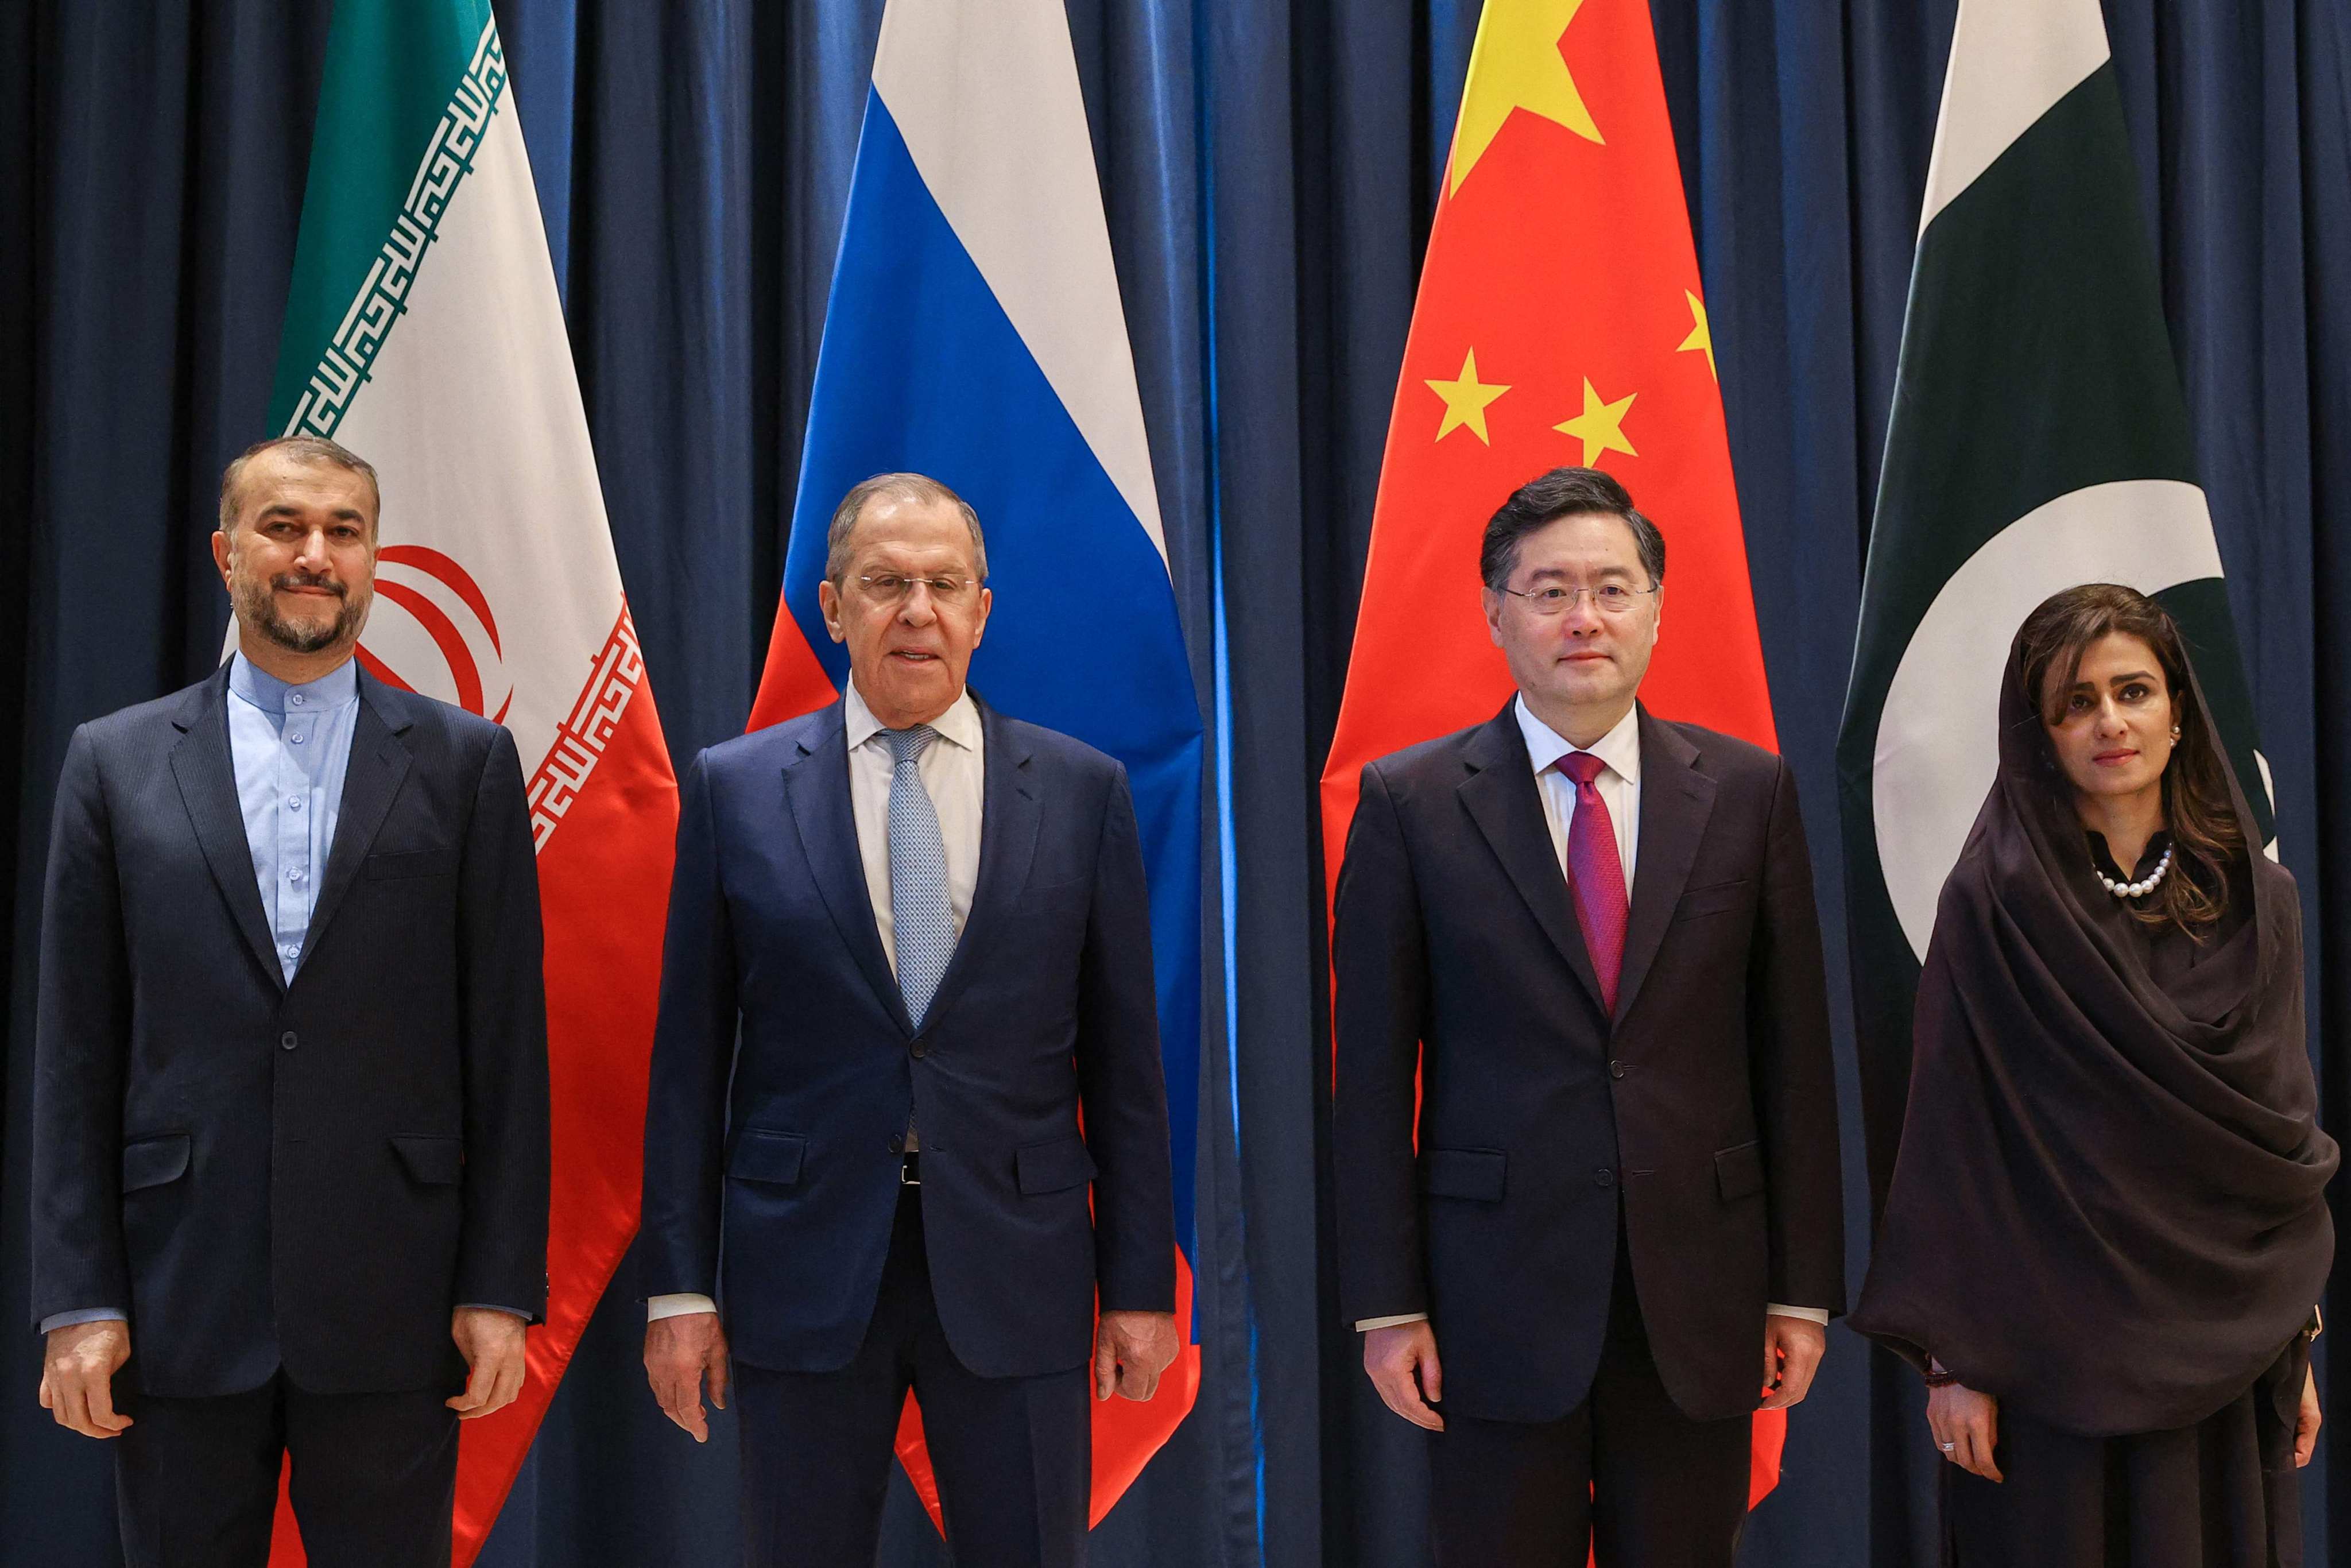 Chinese Foreign Minister Qin Gang (third left) with regional counterparts (from left) Hossein Amir-Abdollahian of Iran, Sergey Lavrov of Russia and Hina Rabbani Khar of Pakistan, in Samarkand on Thursday. Photo: AFP